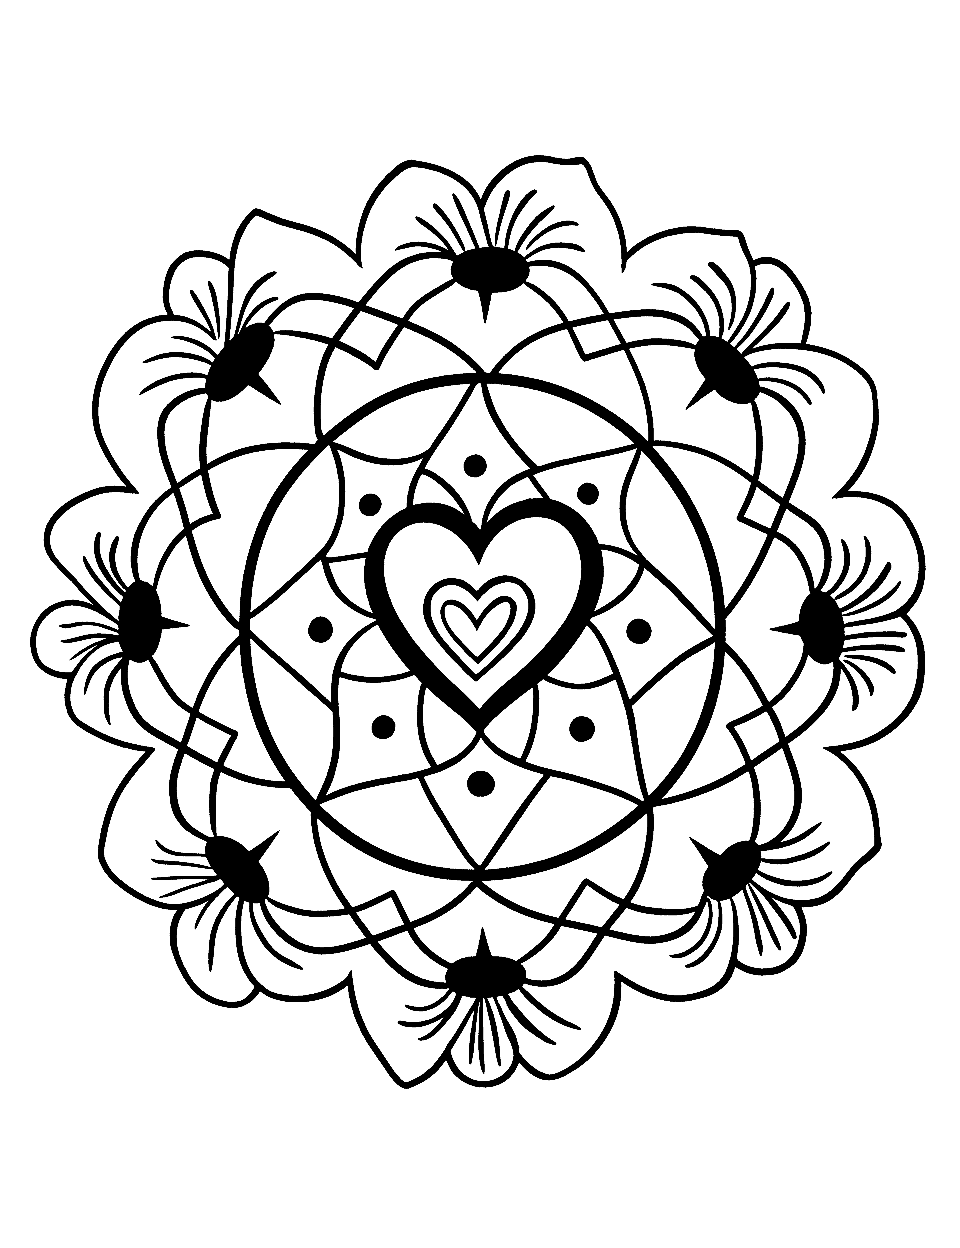 Mandala of Kindness Coloring Page - An abstract mandala featuring heart shapes and handprints teaching children about kindness and empathy.